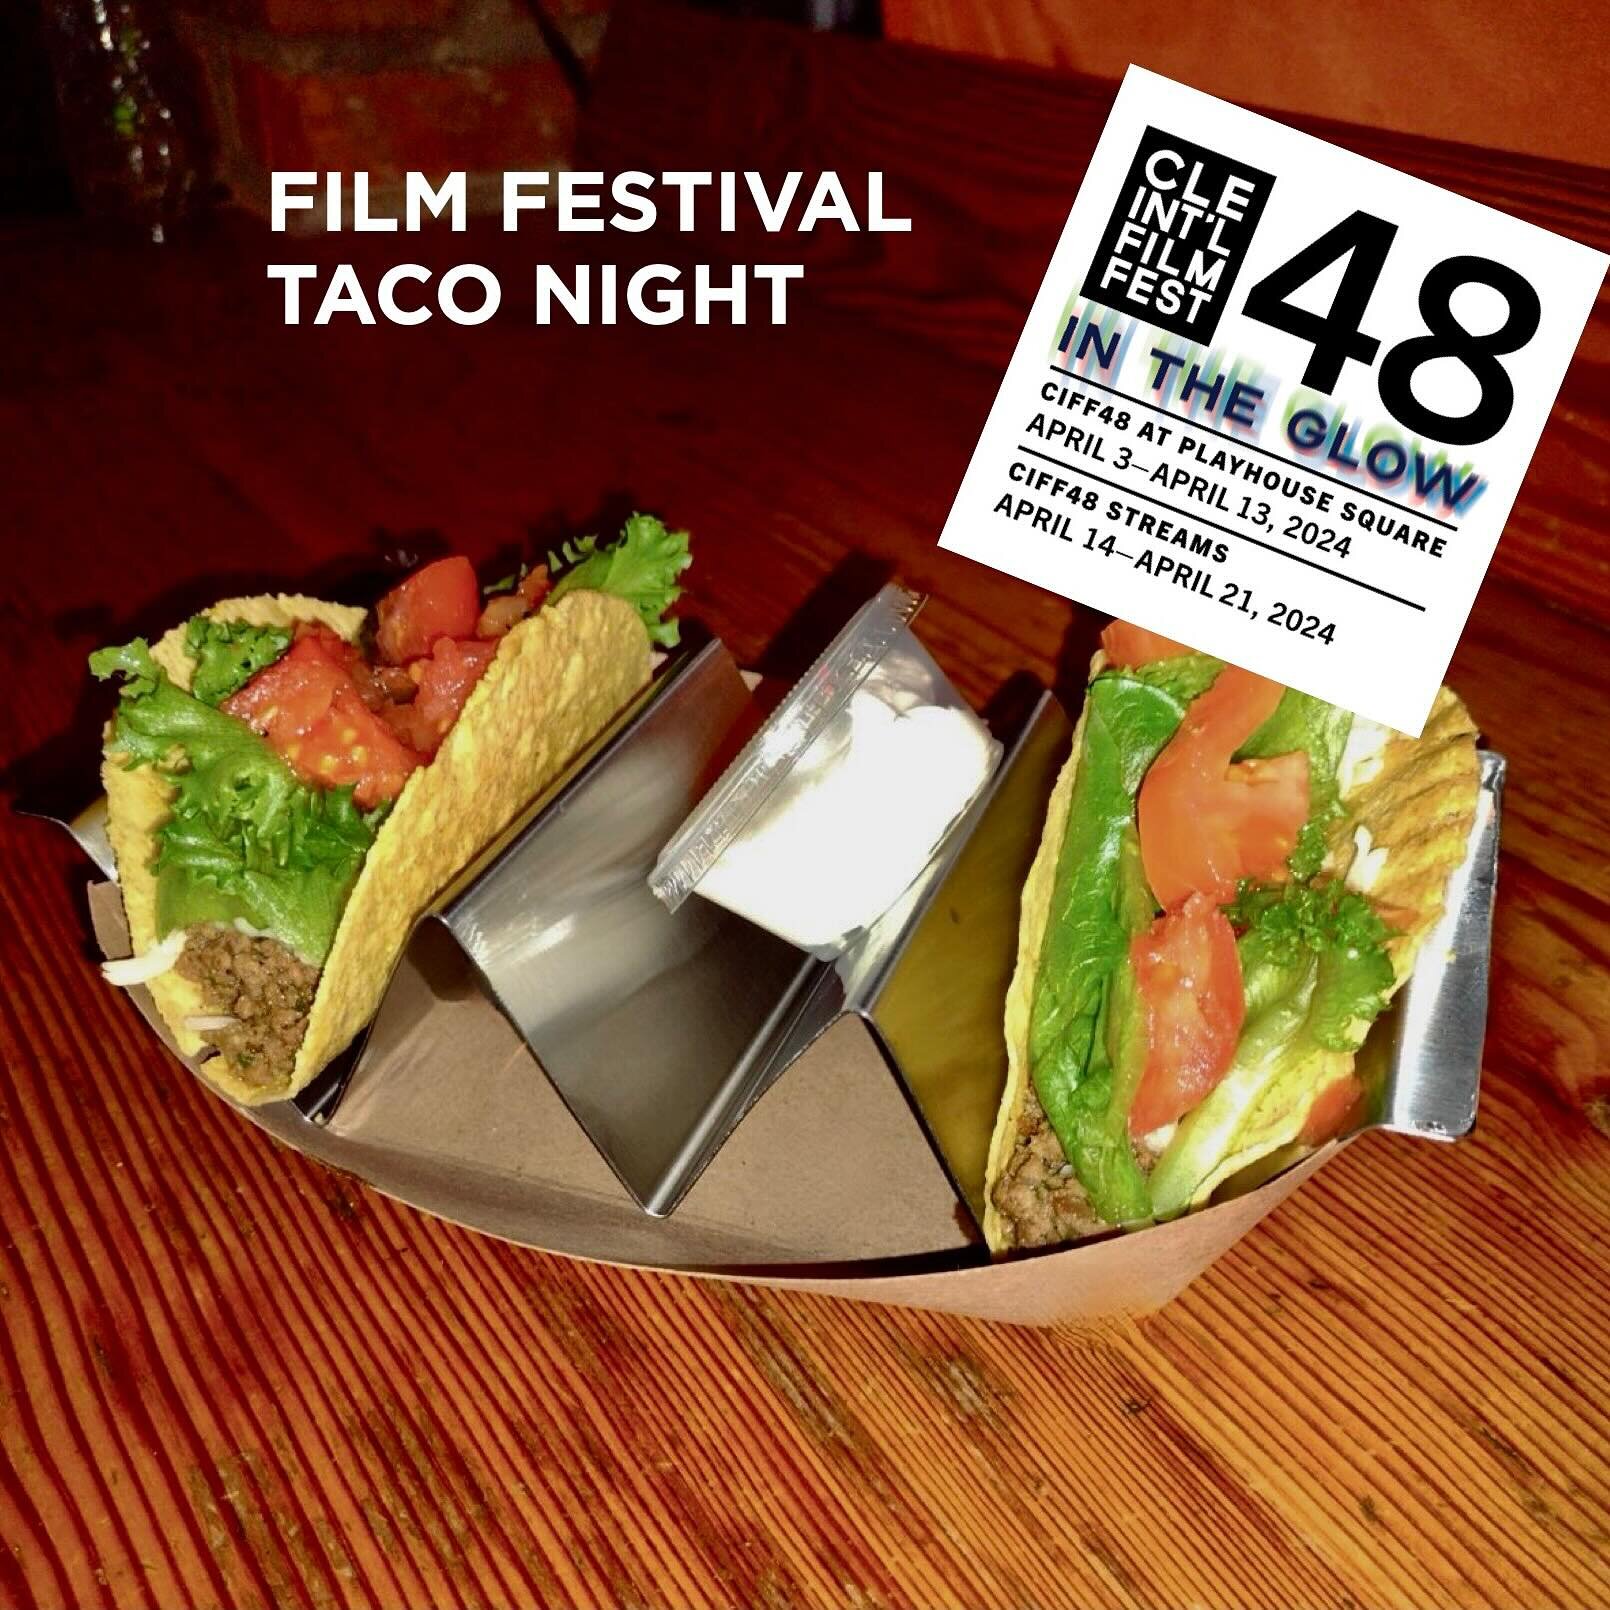 CIFF TACO NIGHT 🎥 🌮 We&rsquo;re adding extra zest to tonight&rsquo;s #TacoTuesday. We are an official sponsor for the 48th @clefilmfest (Apr 3-13). Tonight - anyone who purchases tacos gets entered into a drawing to win #CIFF48 Vouchers! They can b